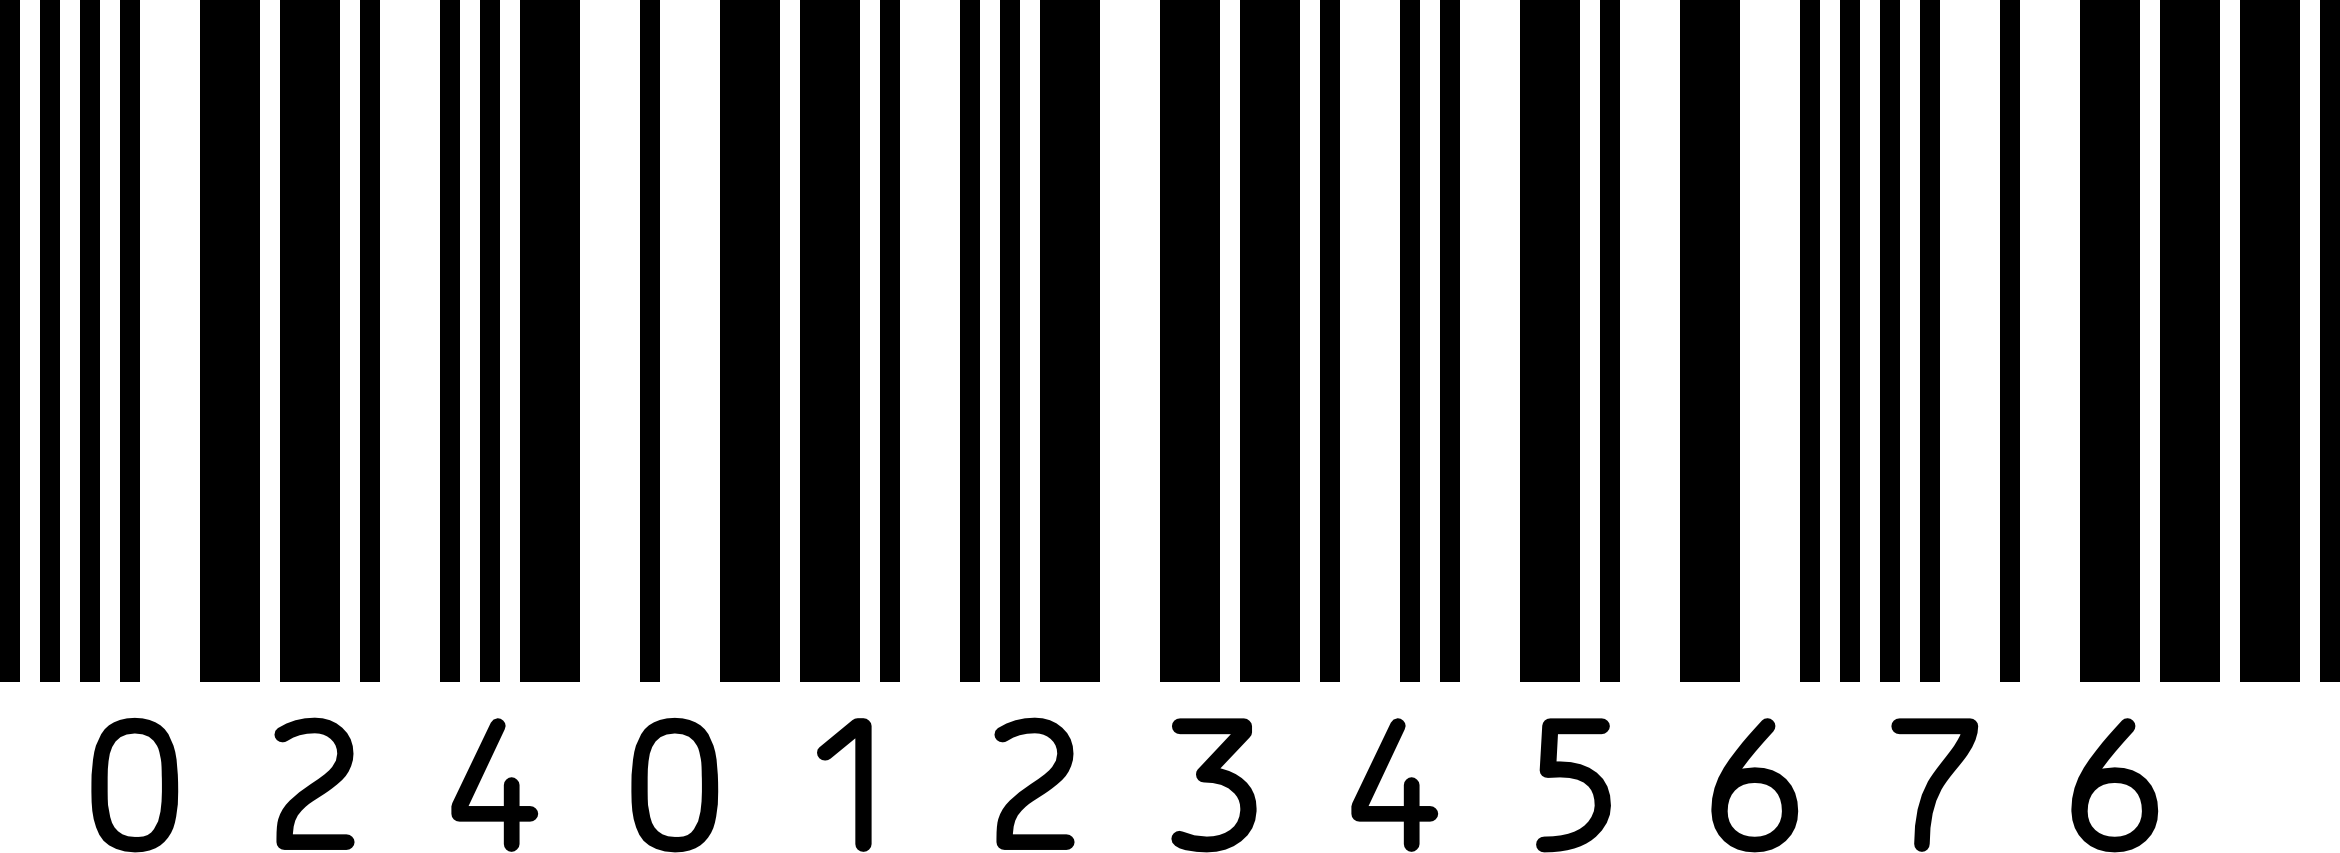 Example Interleaved 2 of 5 ITF Barcode